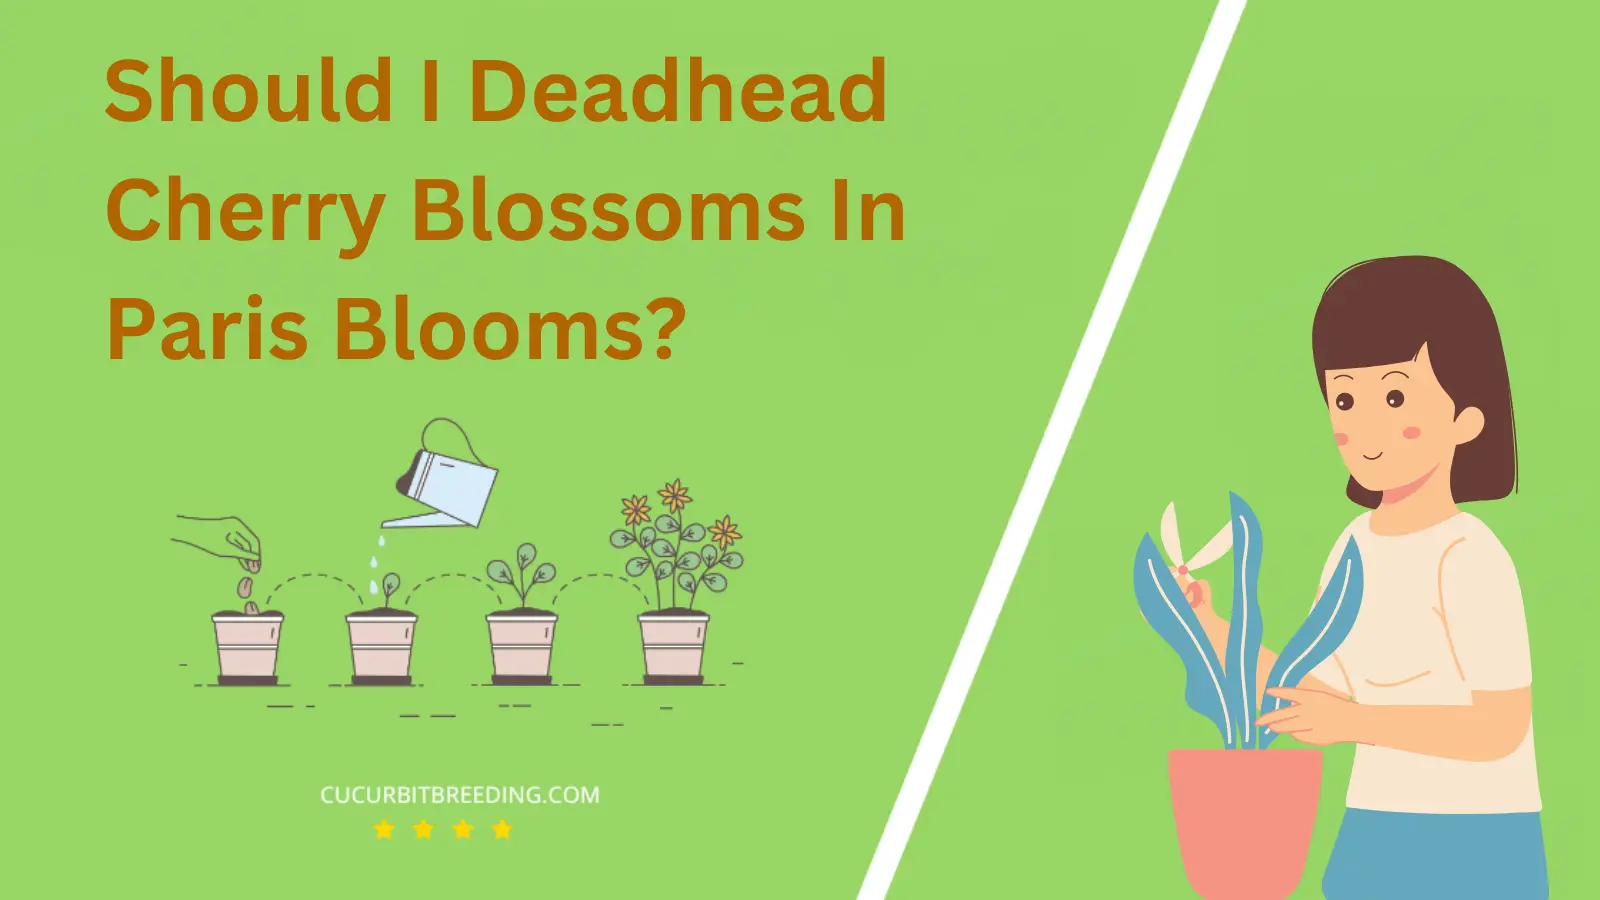 Should I Deadhead Cherry Blossoms In Paris Blooms?